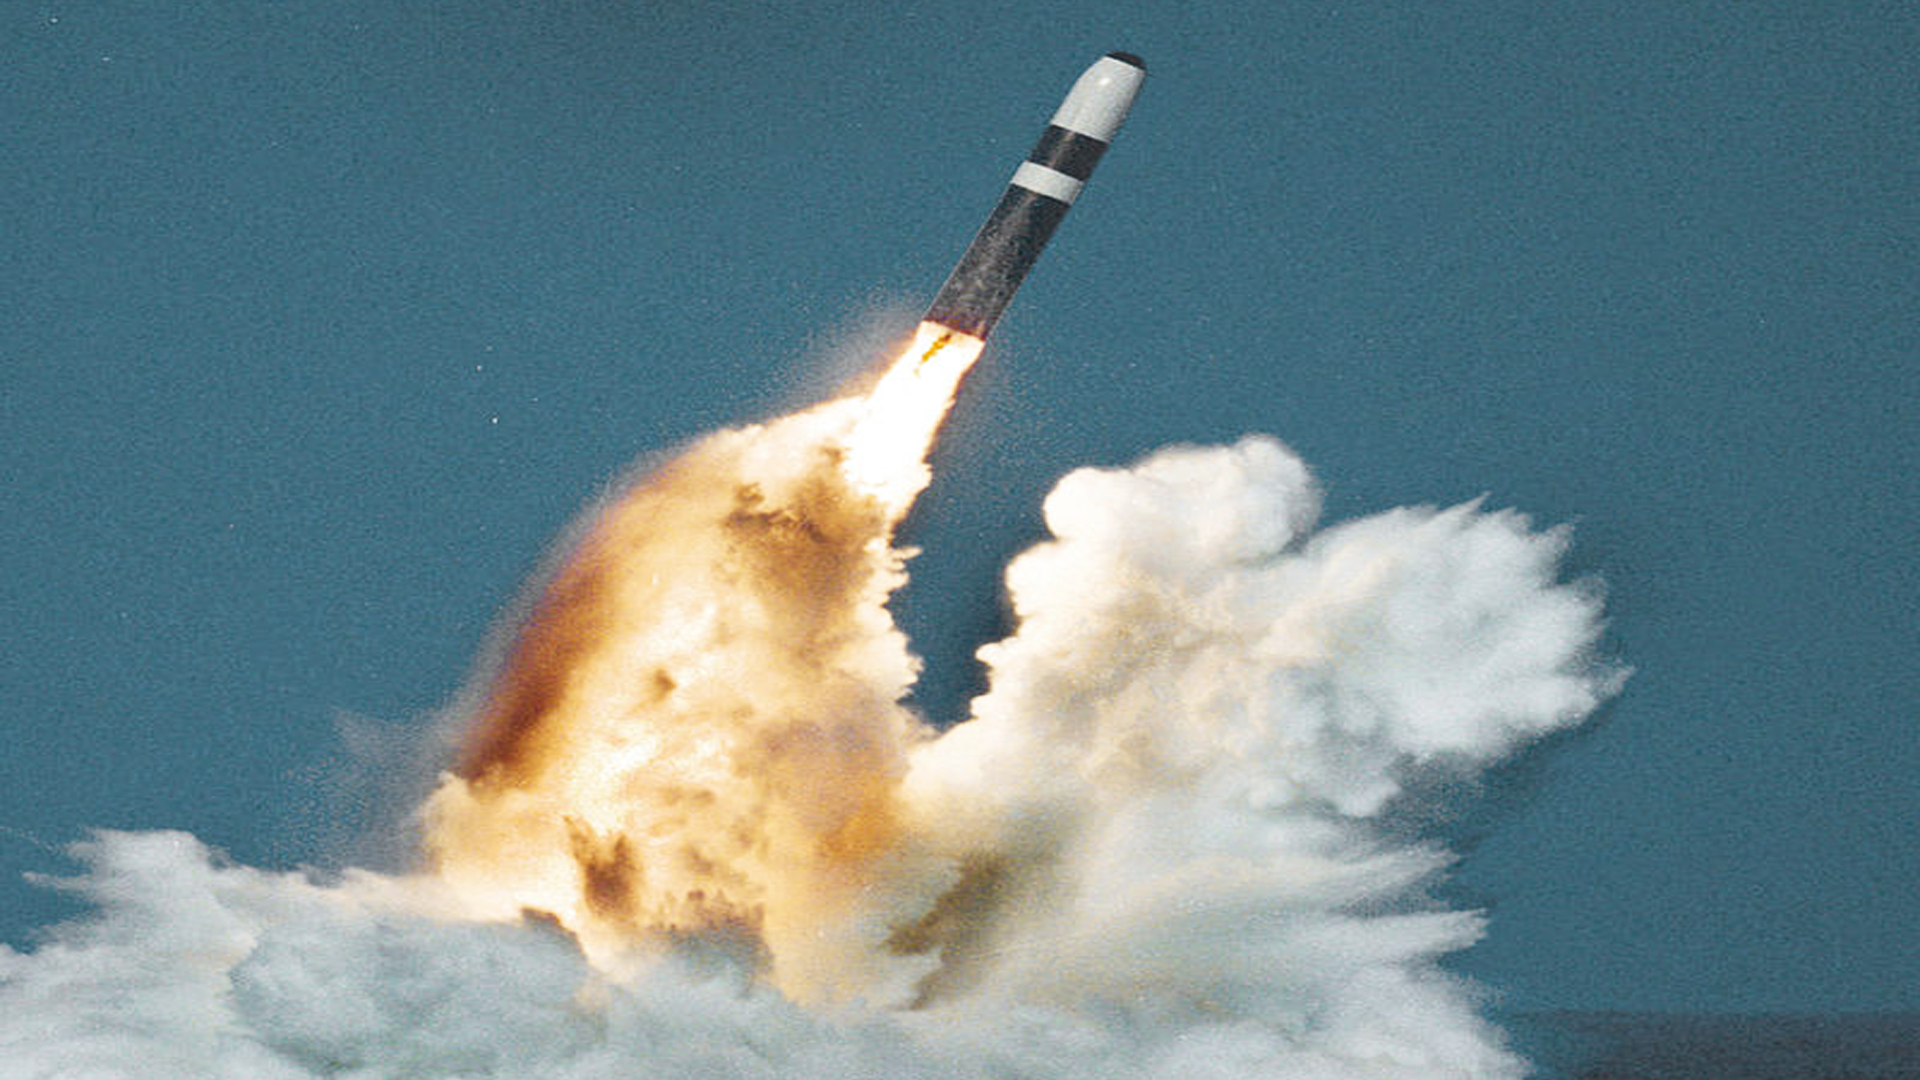 Lockheed Receives $397M in Navy Trident II Missile Contract Options